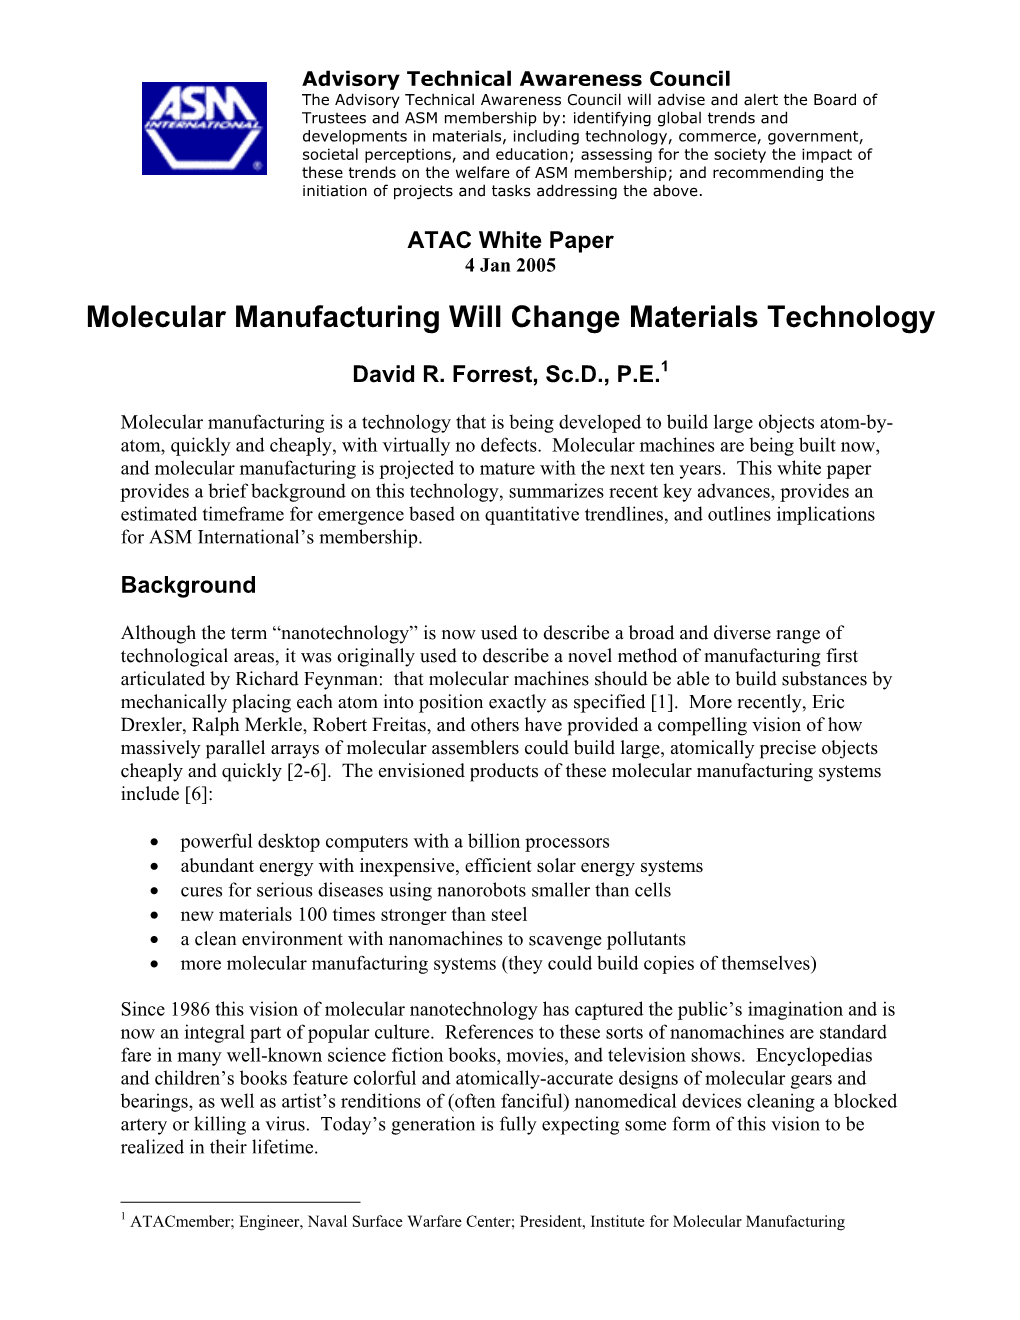 Molecular Manufacturing Will Change Materials Technology